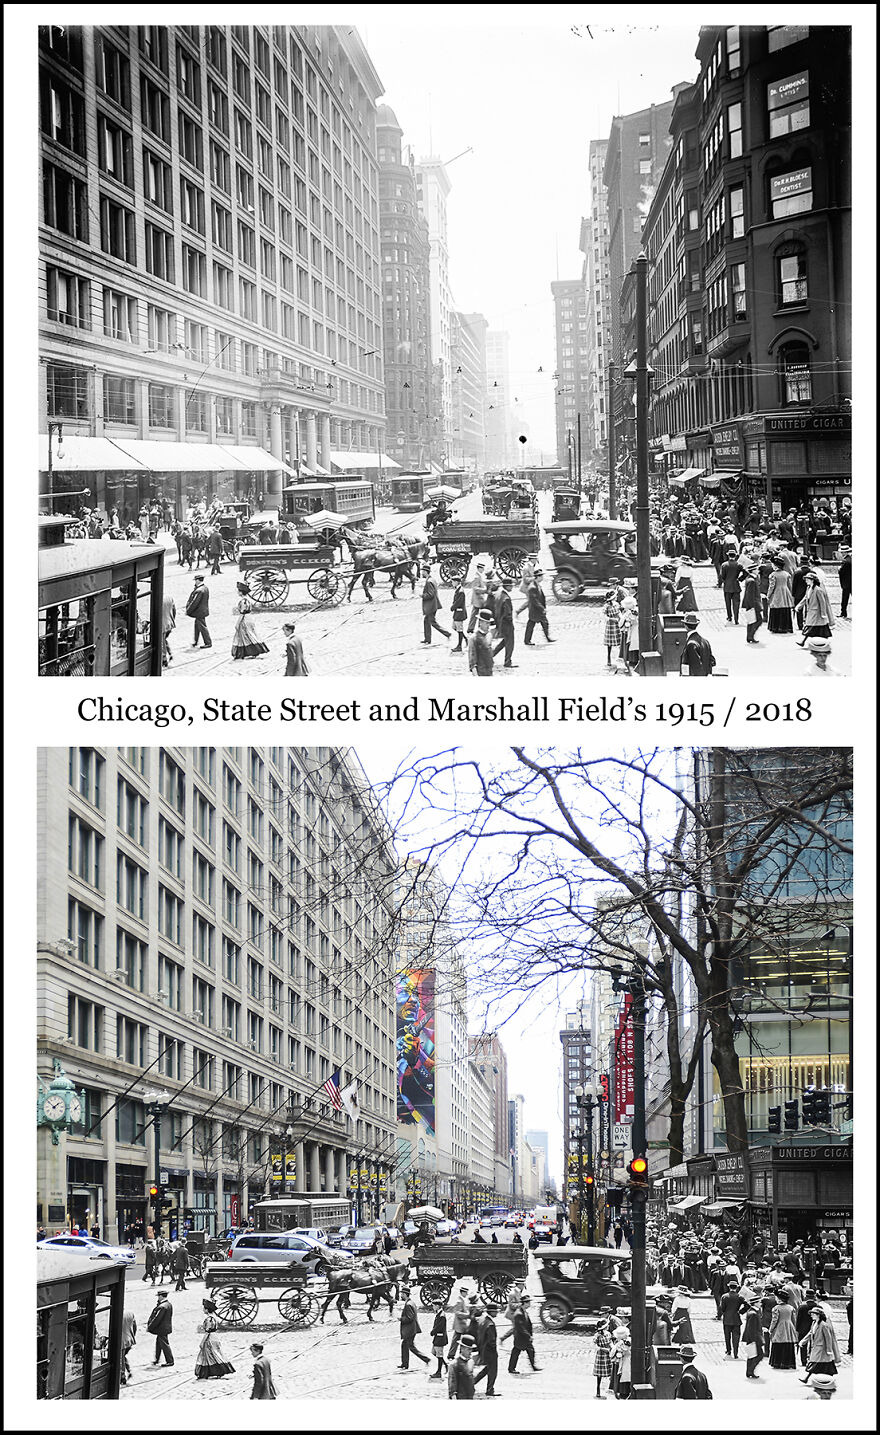 Chicago, State Street And Marshall Field's 1915 / 2018